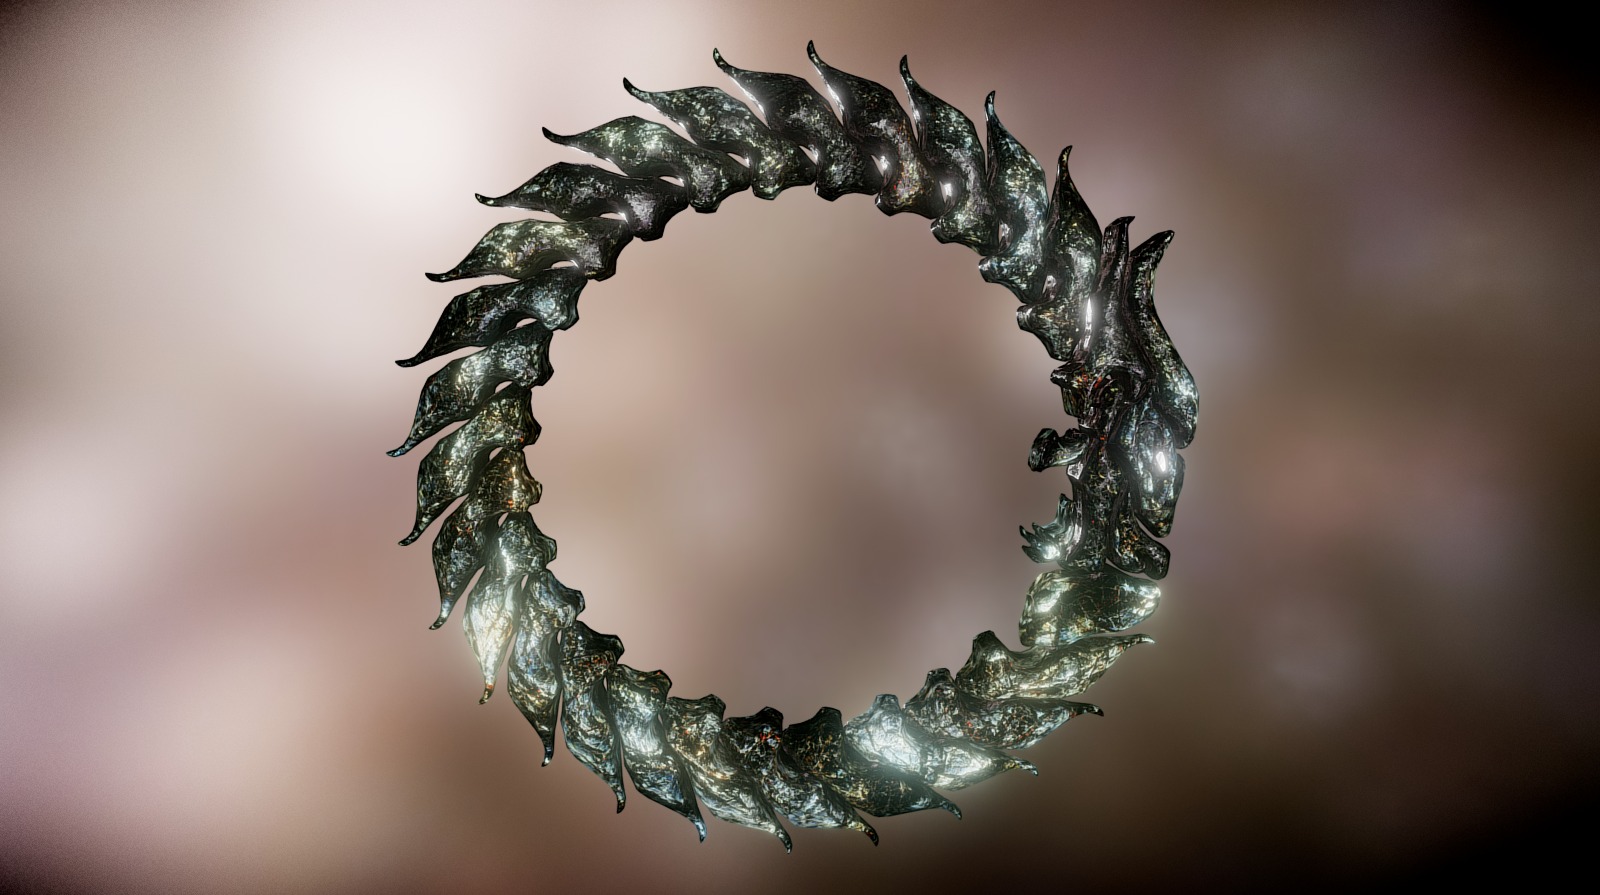 Here's the logo for our upcommig game Ouroboros! Stay tuned for more news on our site! (currently down) - Ouroboros' Logo - 3D model by madgamerstudios 3d model